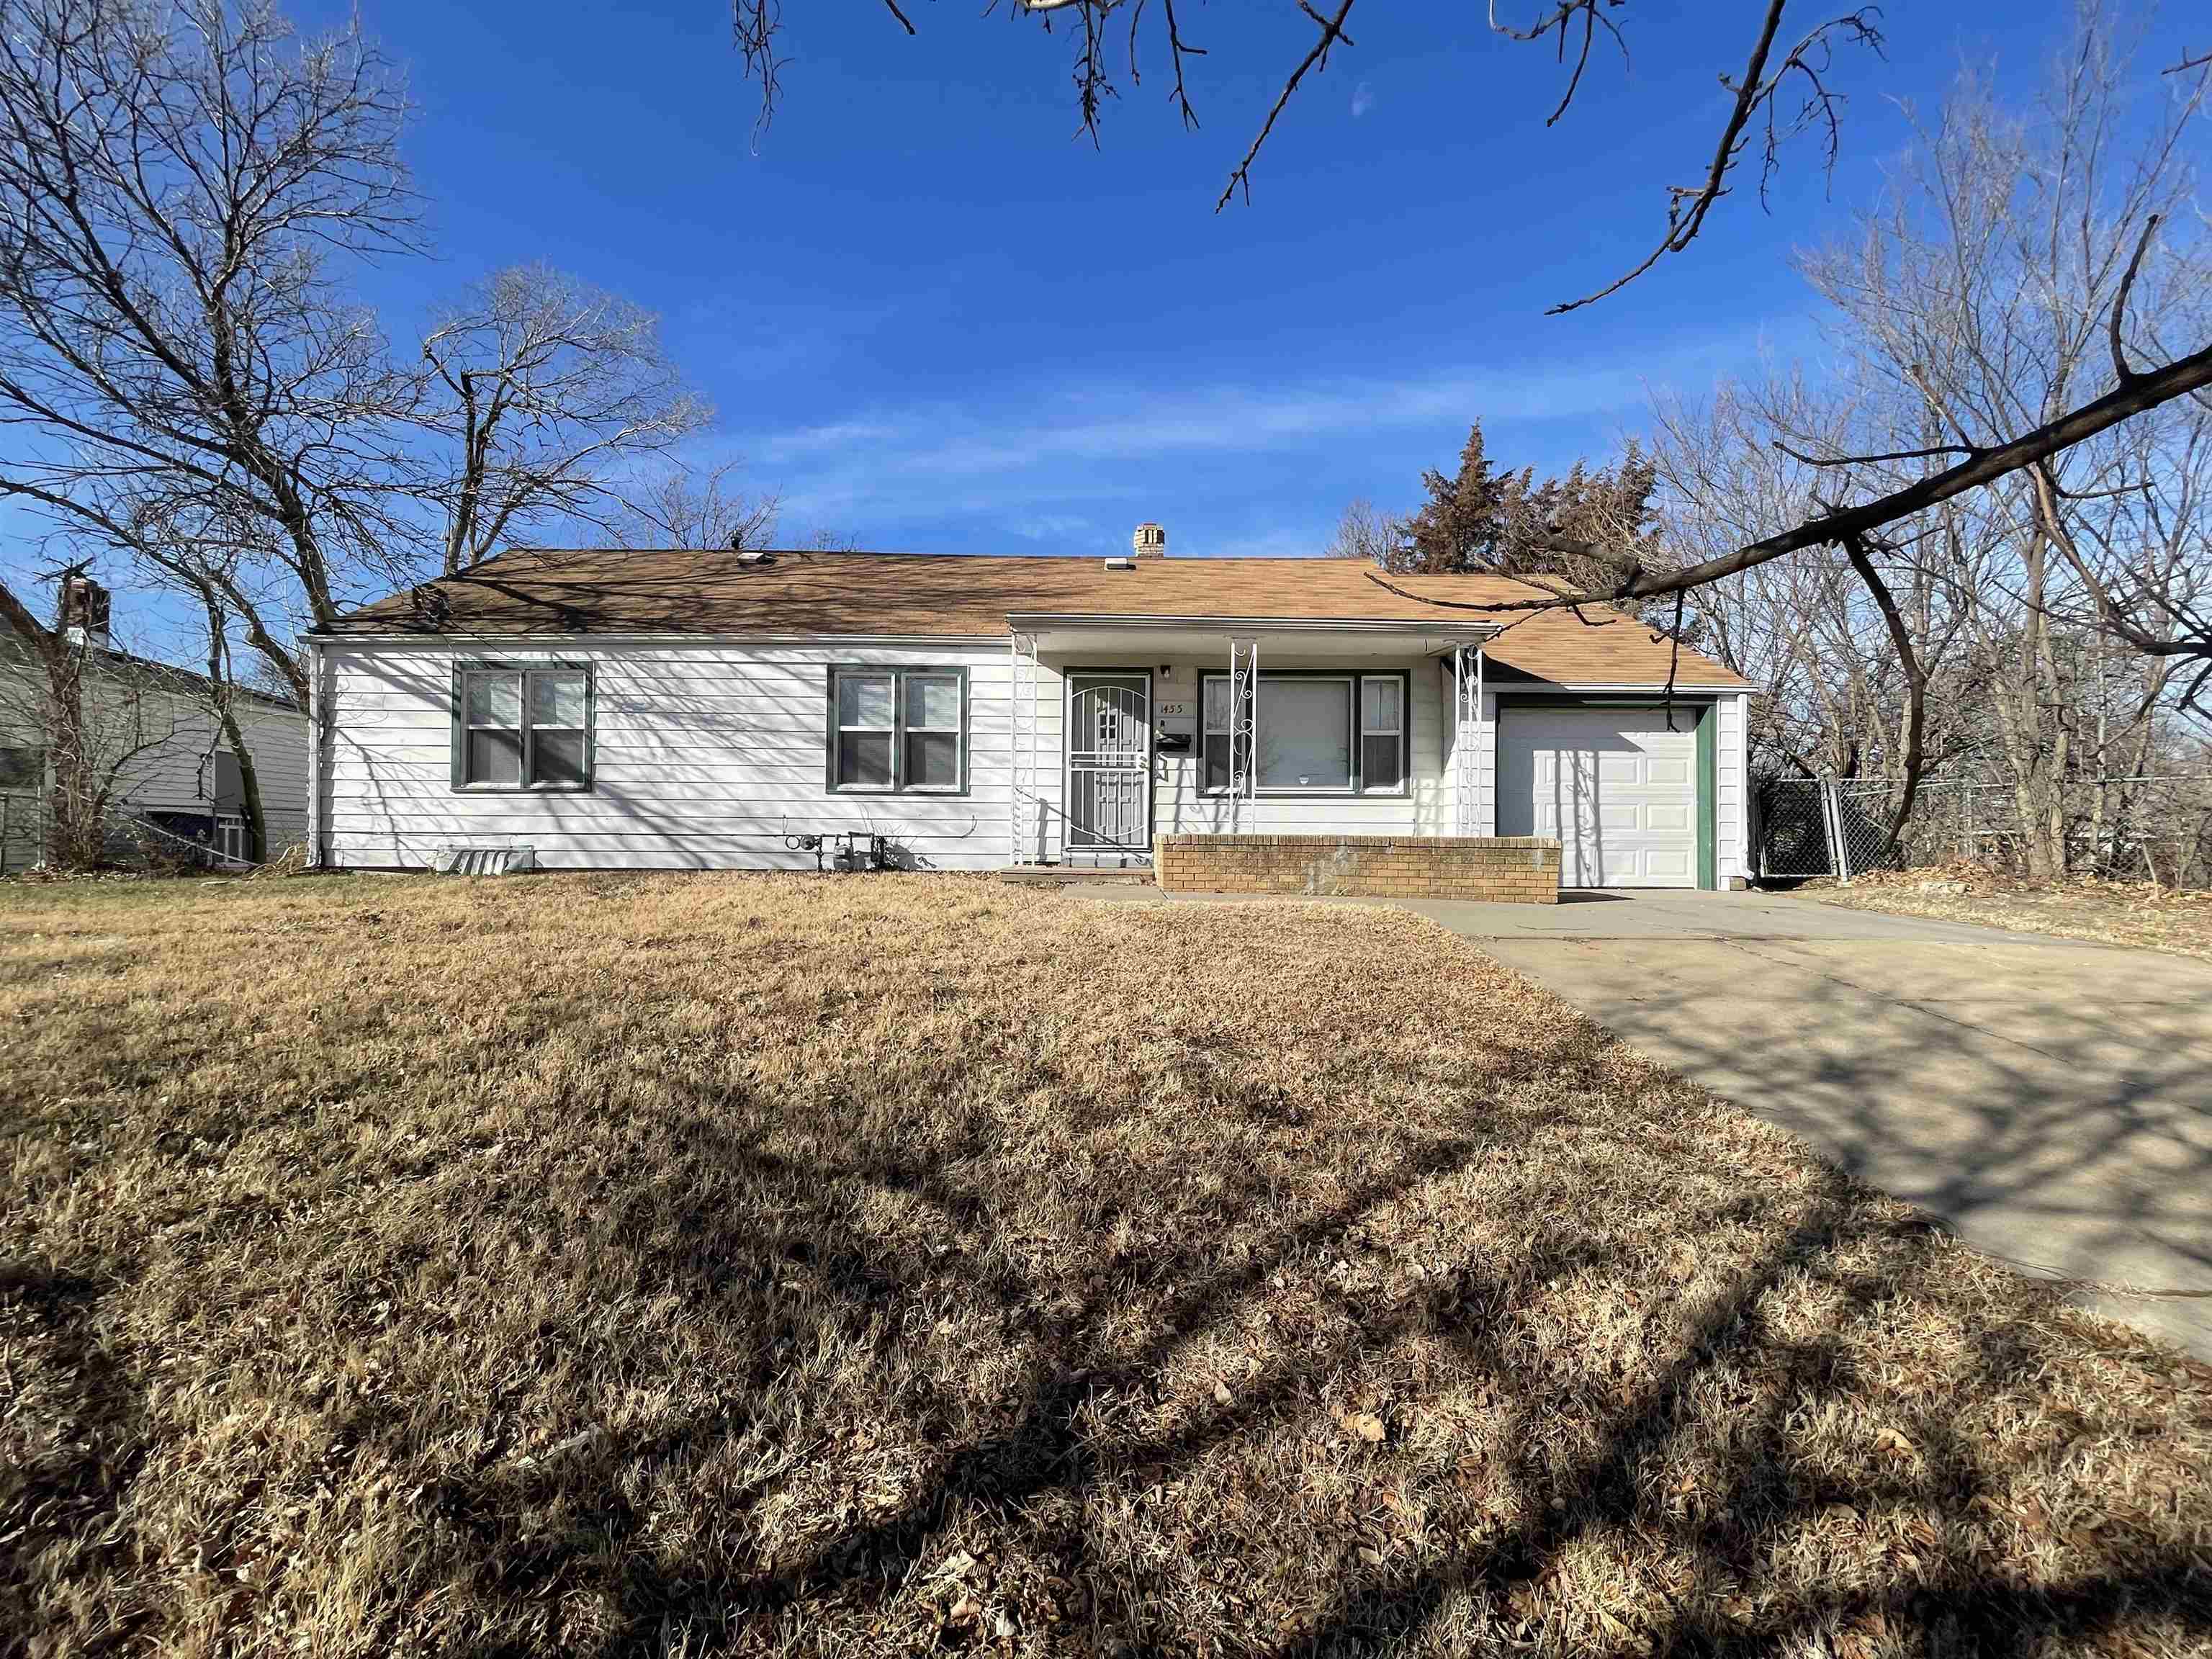 This ranch style home is Move in Ready! This home sits on a large corner lot on a hill. It features 